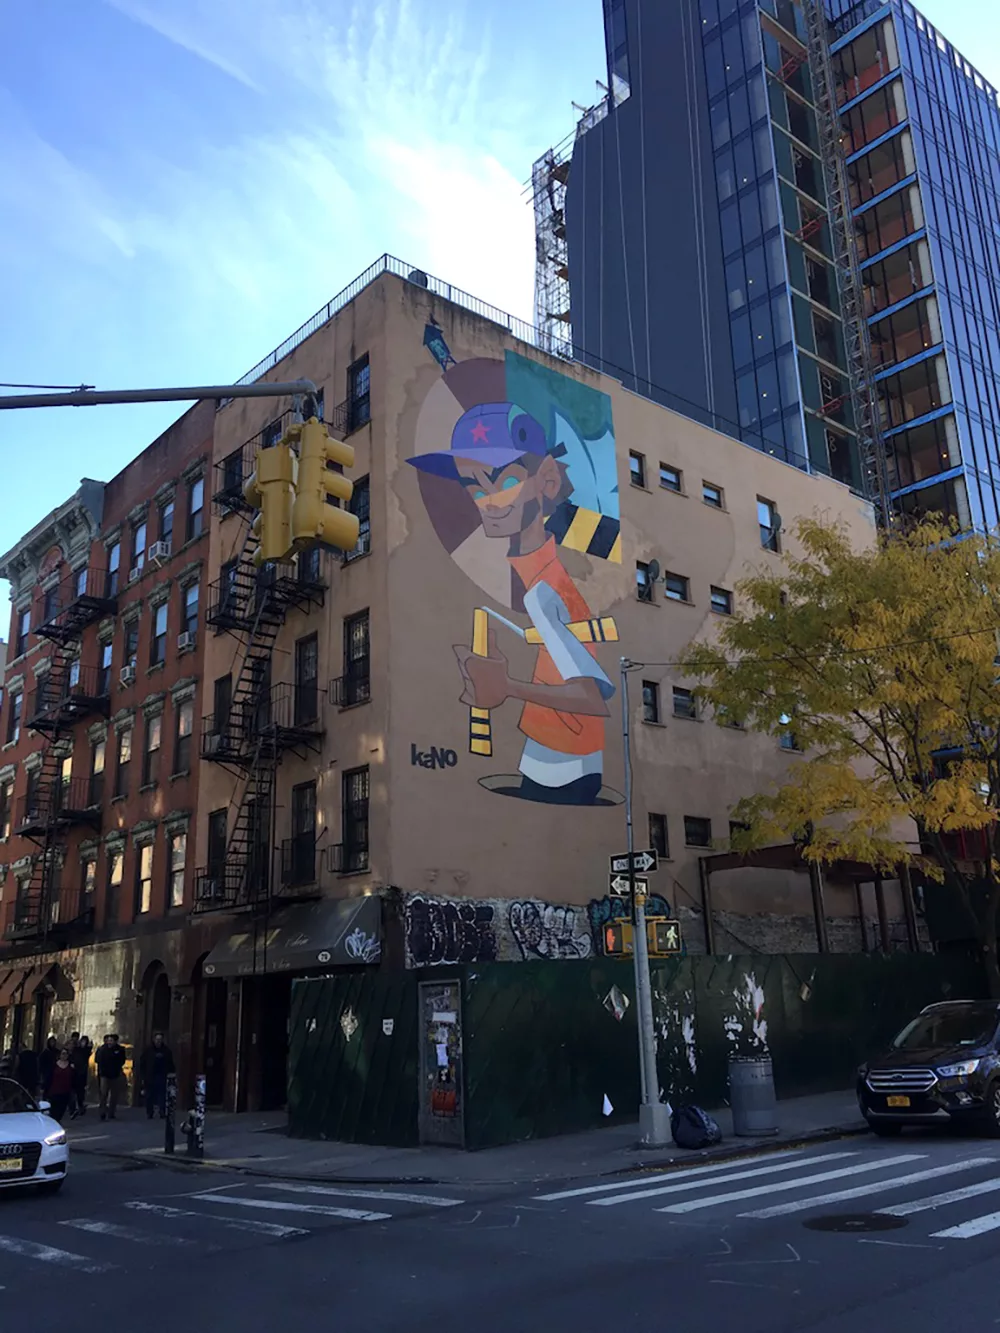 Mural on the side of a building in New York City